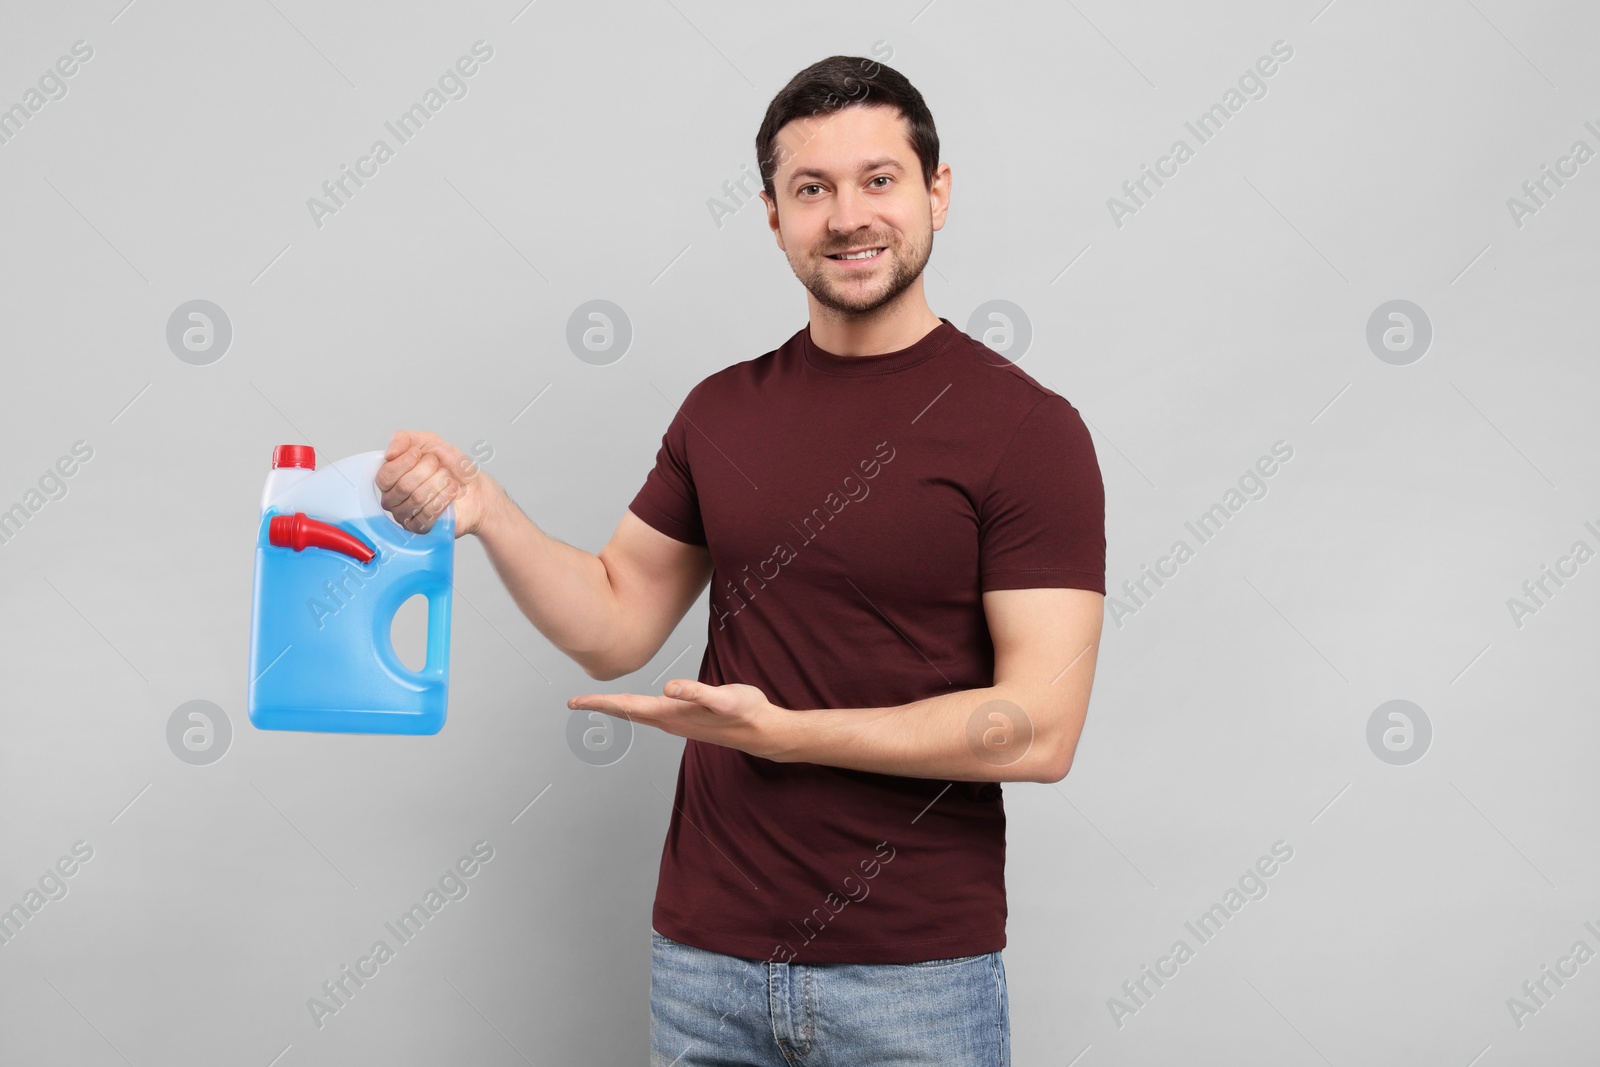 Photo of Handsome man showing canister with blue liquid on light grey background